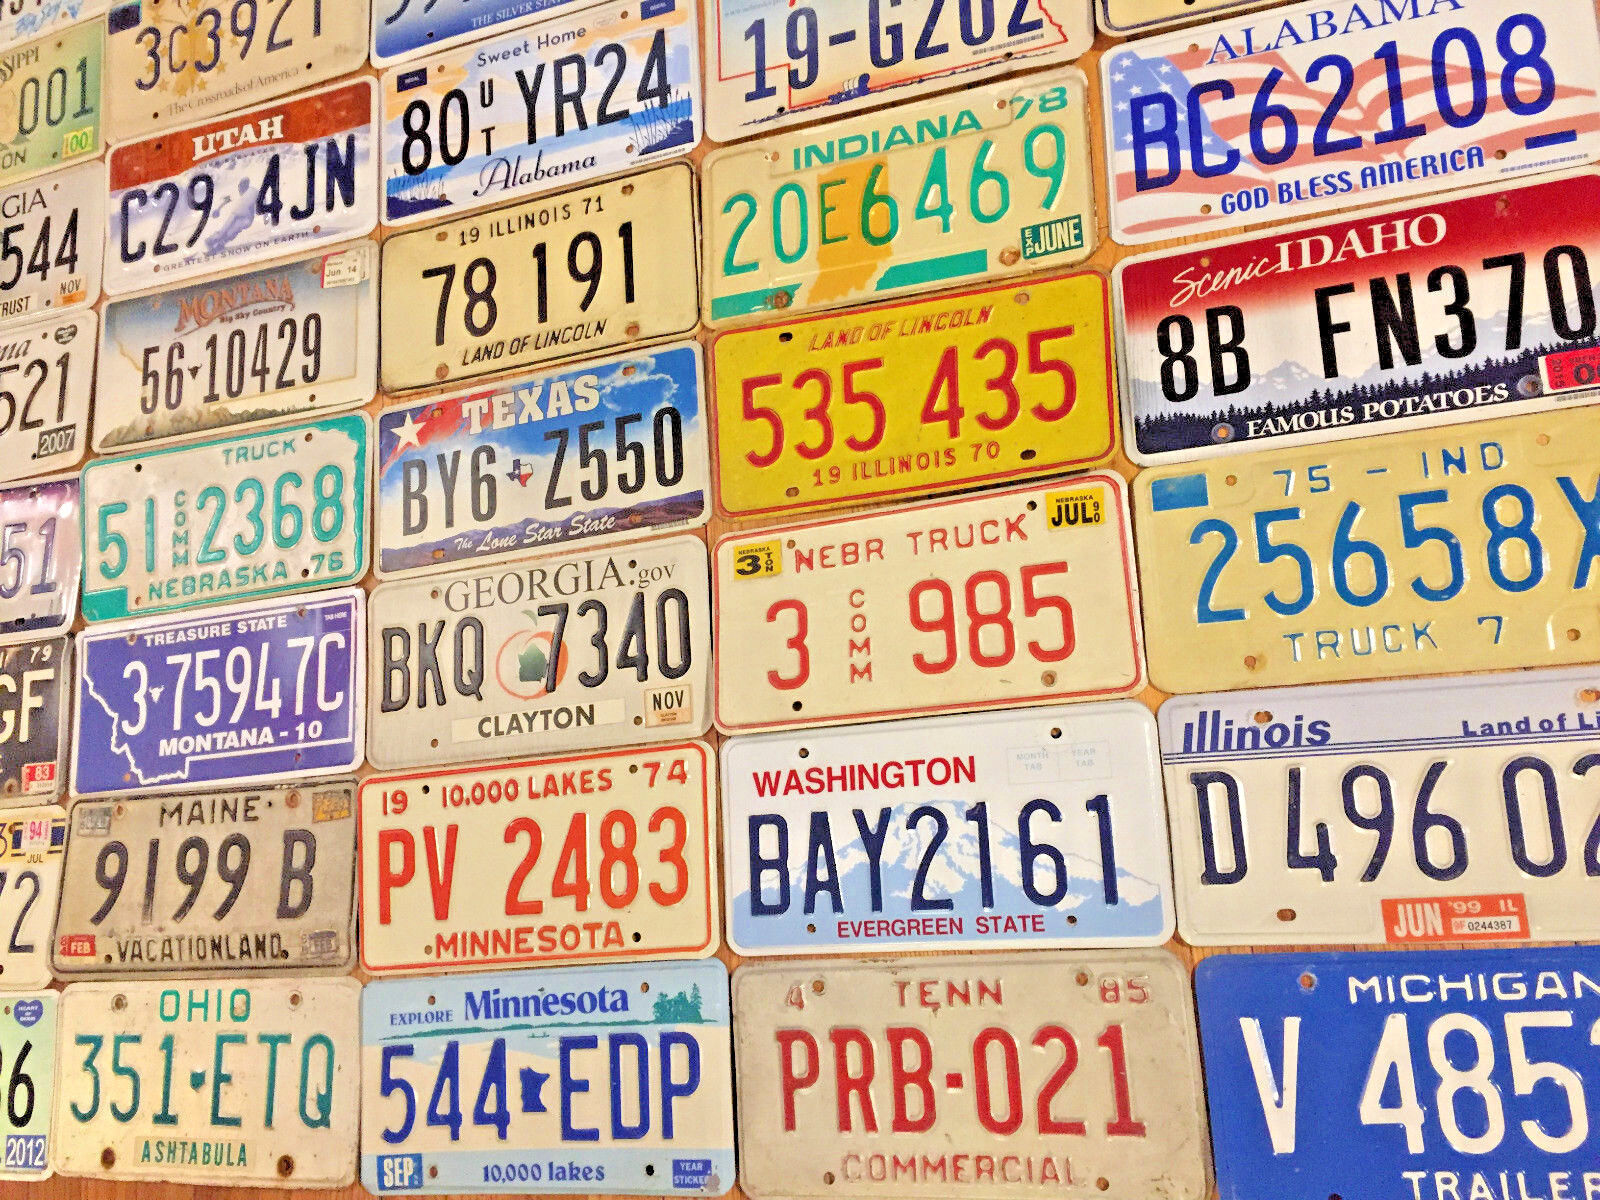 Starter pack of 10 License Plates From 10 Different States